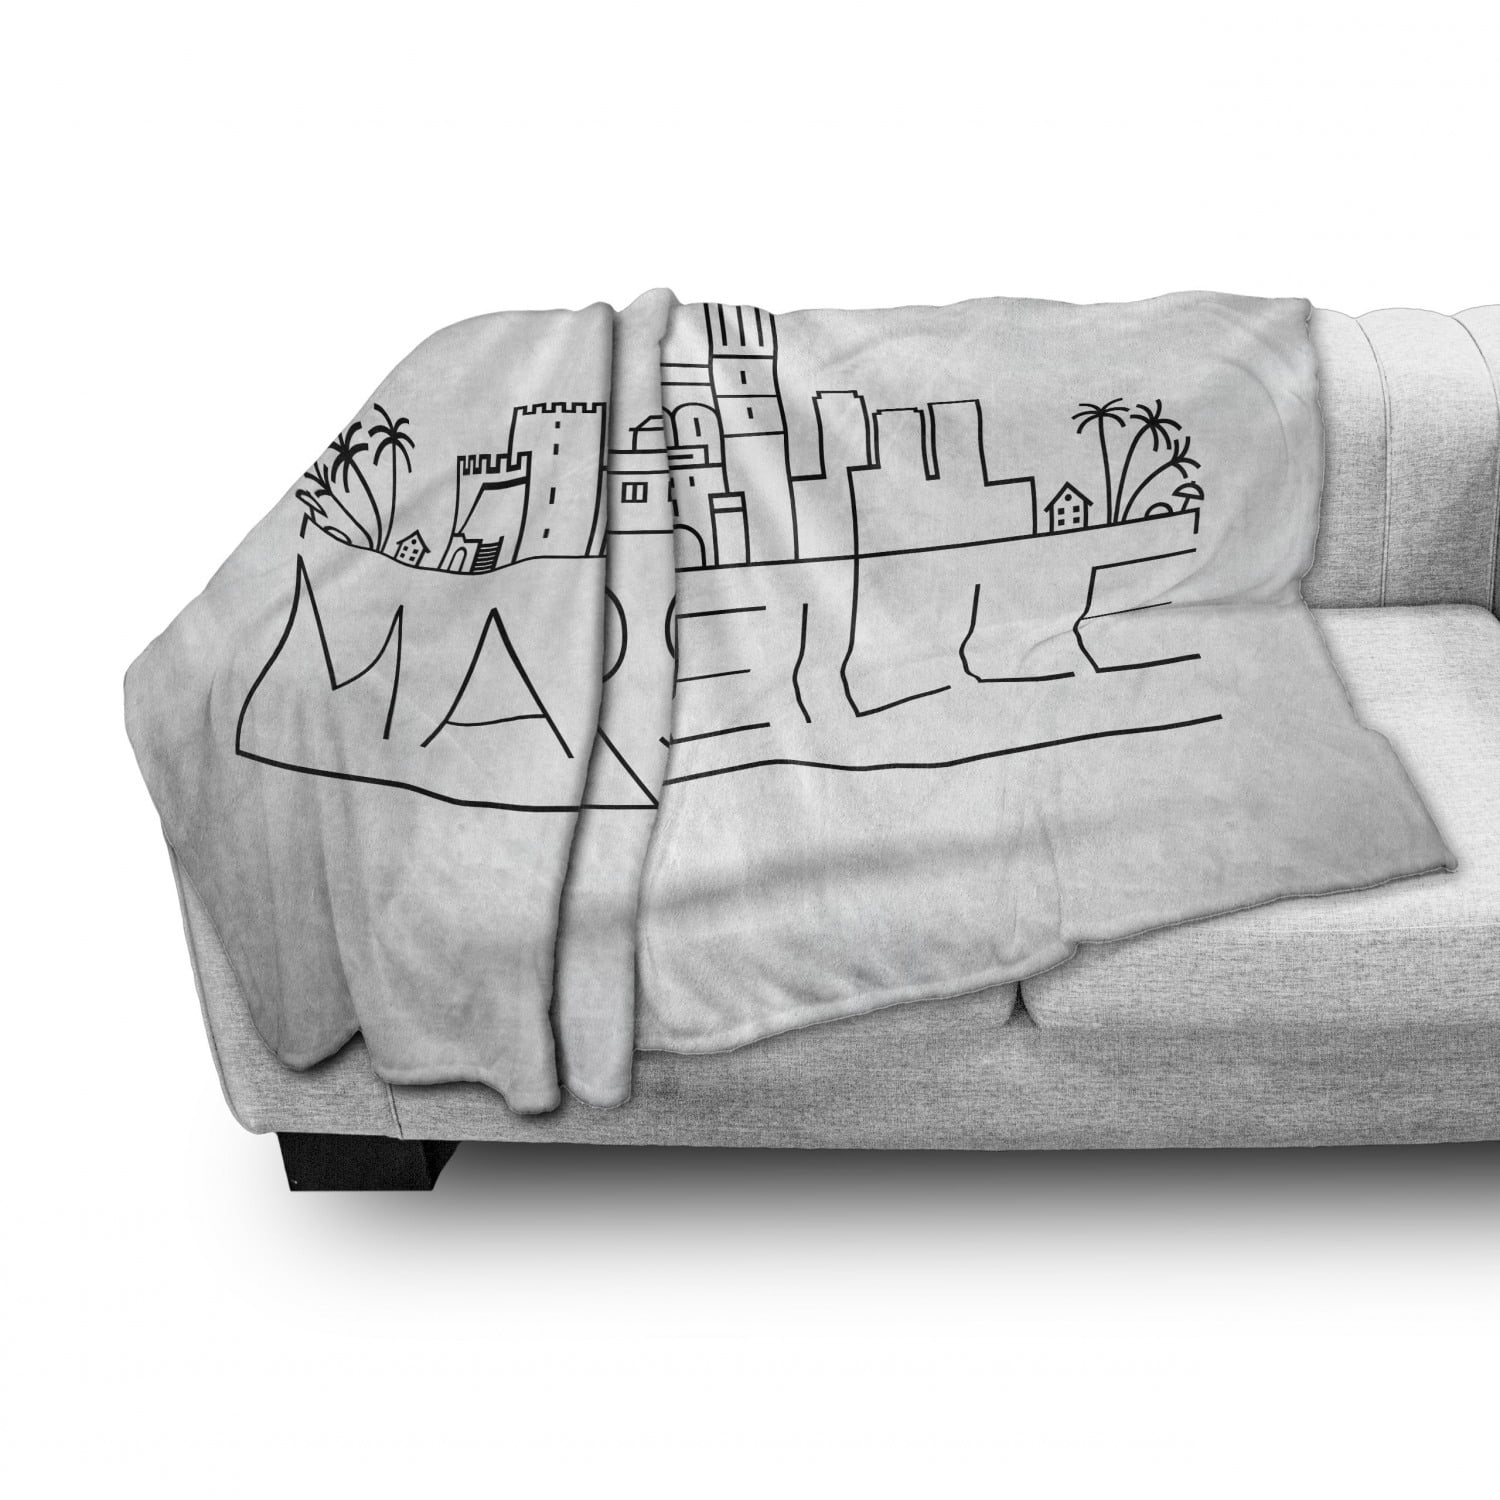 Linear Art Skyline Illustration of Marseille in Typographic Design White and Charcoal Grey Cozy Plush for Indoor and Outdoor Use Ambesonne France Soft Flannel Fleece Throw Blanket 50 x 70